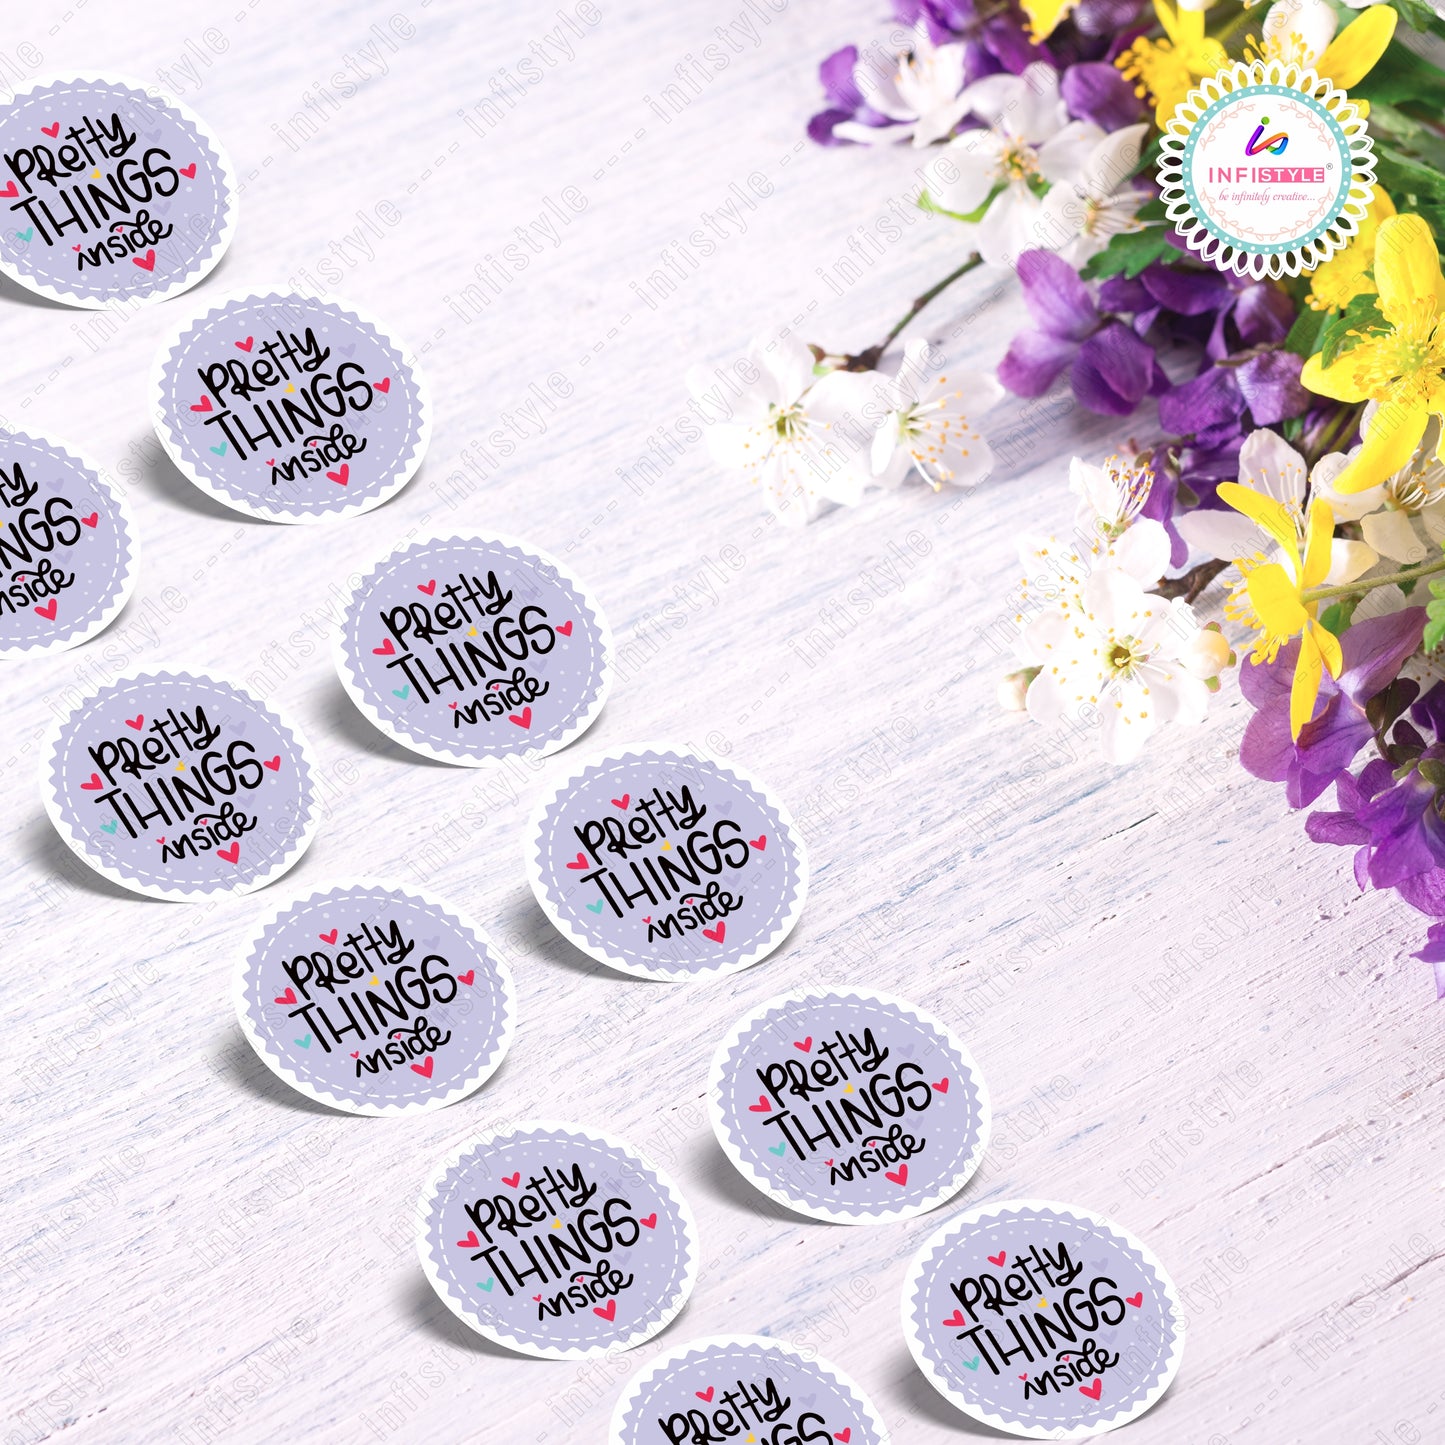 Pretty Things Inside Stickers Round Label